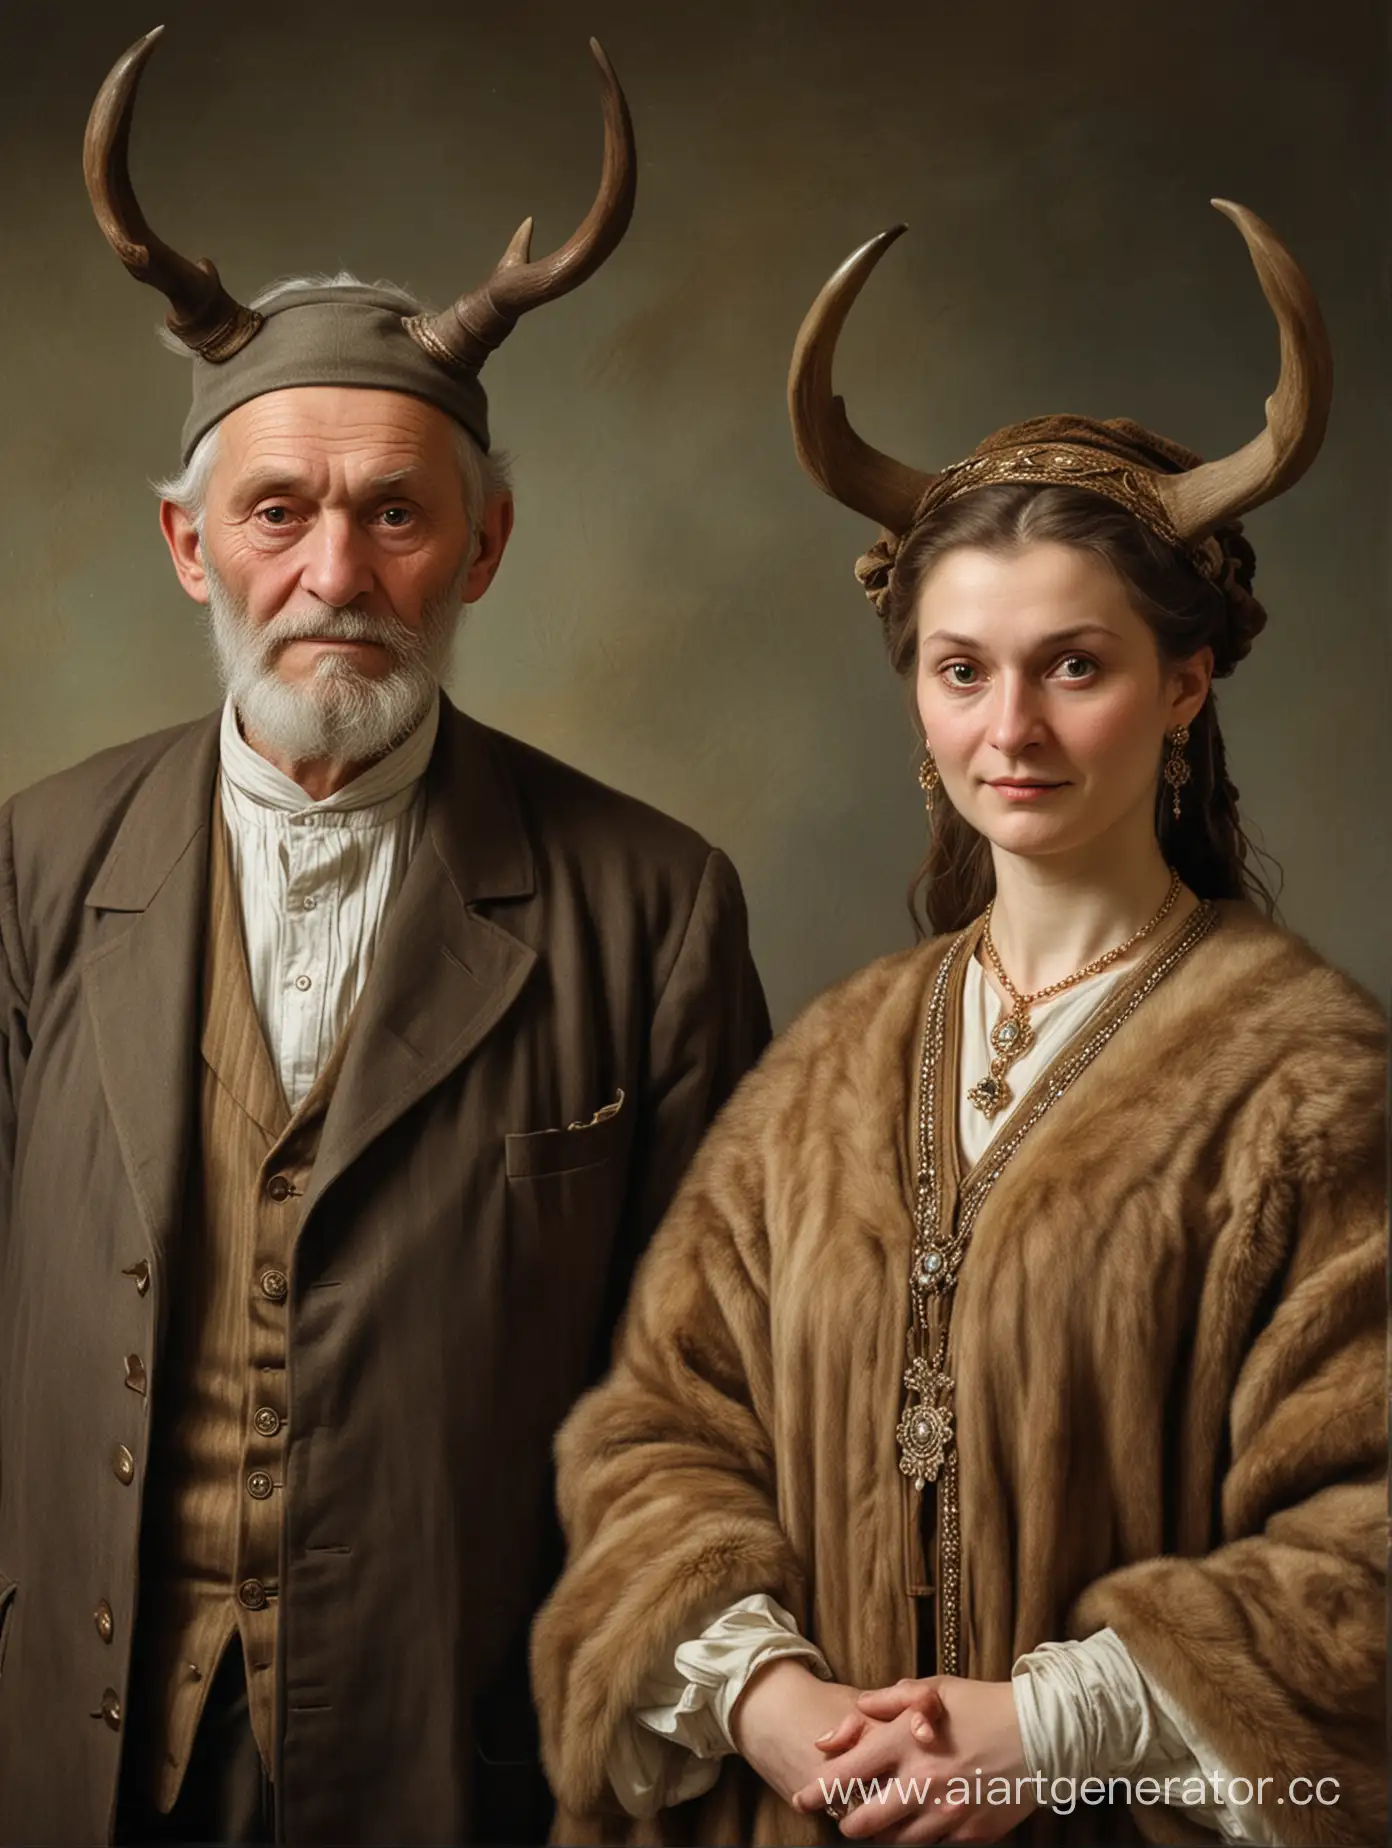 Elderly-Couple-with-Deer-Horns-and-Wealthy-Count-in-18th-Century-Russia